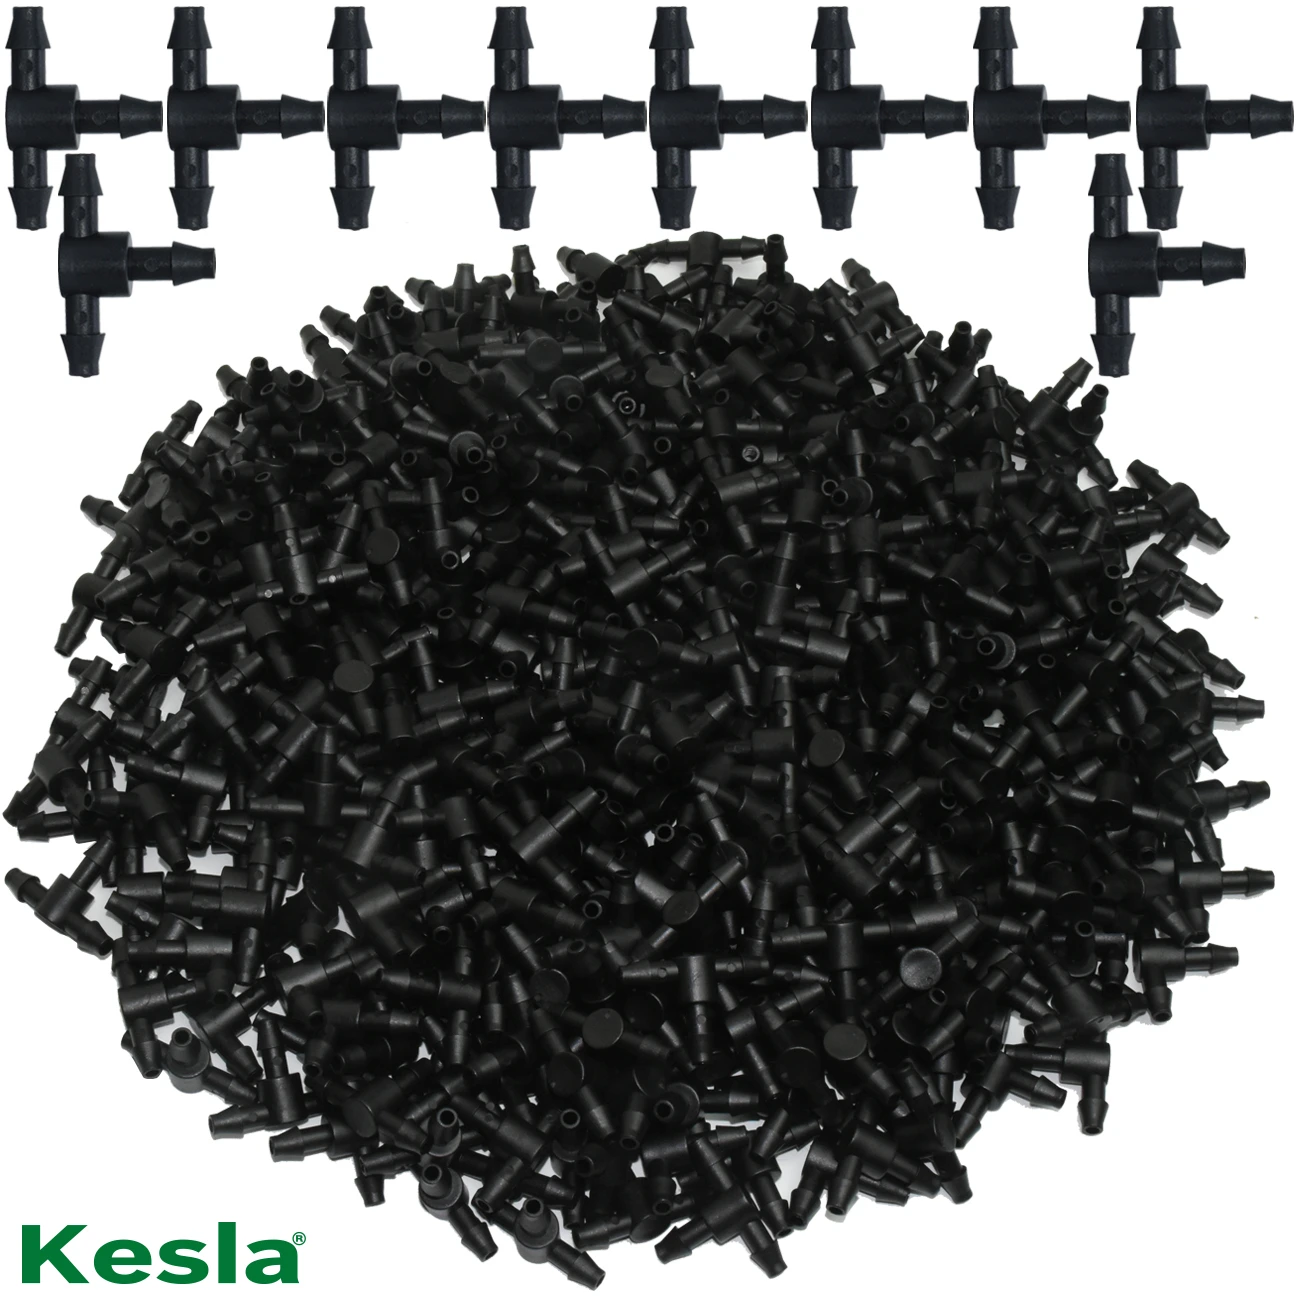 KESLA 50PCS Plastic Barbed 3-Way TEE Connector for 4/7mm Tubing Watering Pipe Hose Couplings Micro Drip Irrigation Garden Tools